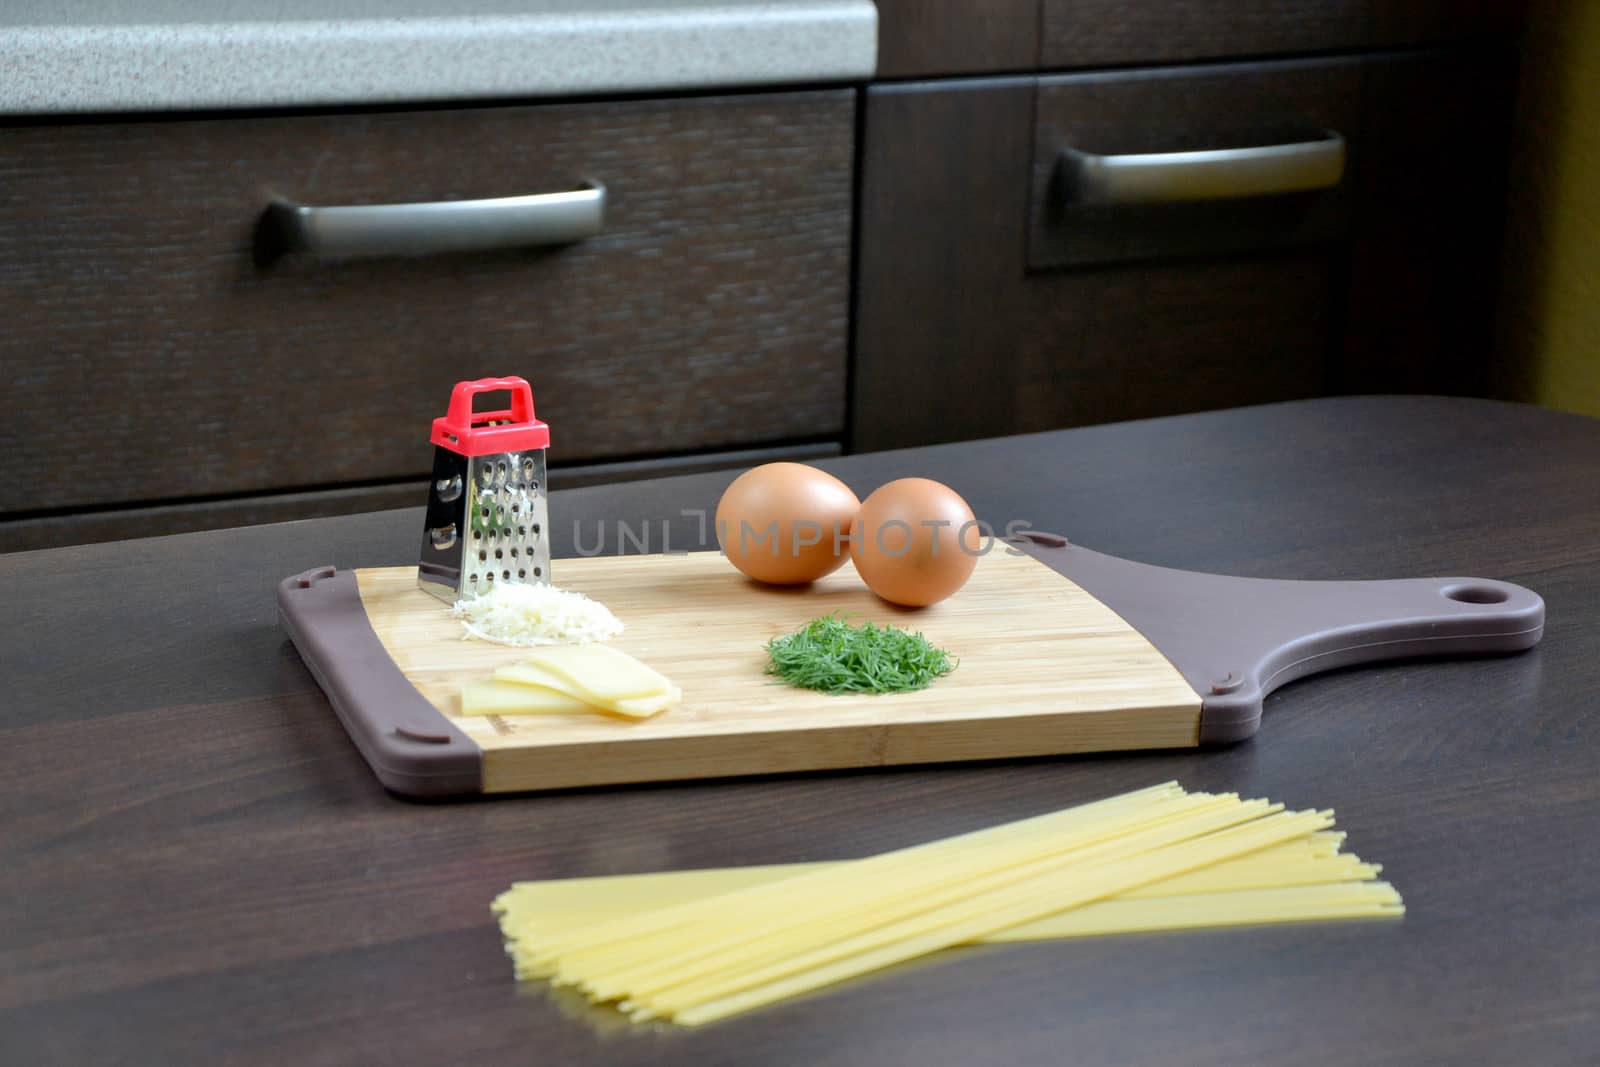 Ingredients for pasta by ruv86